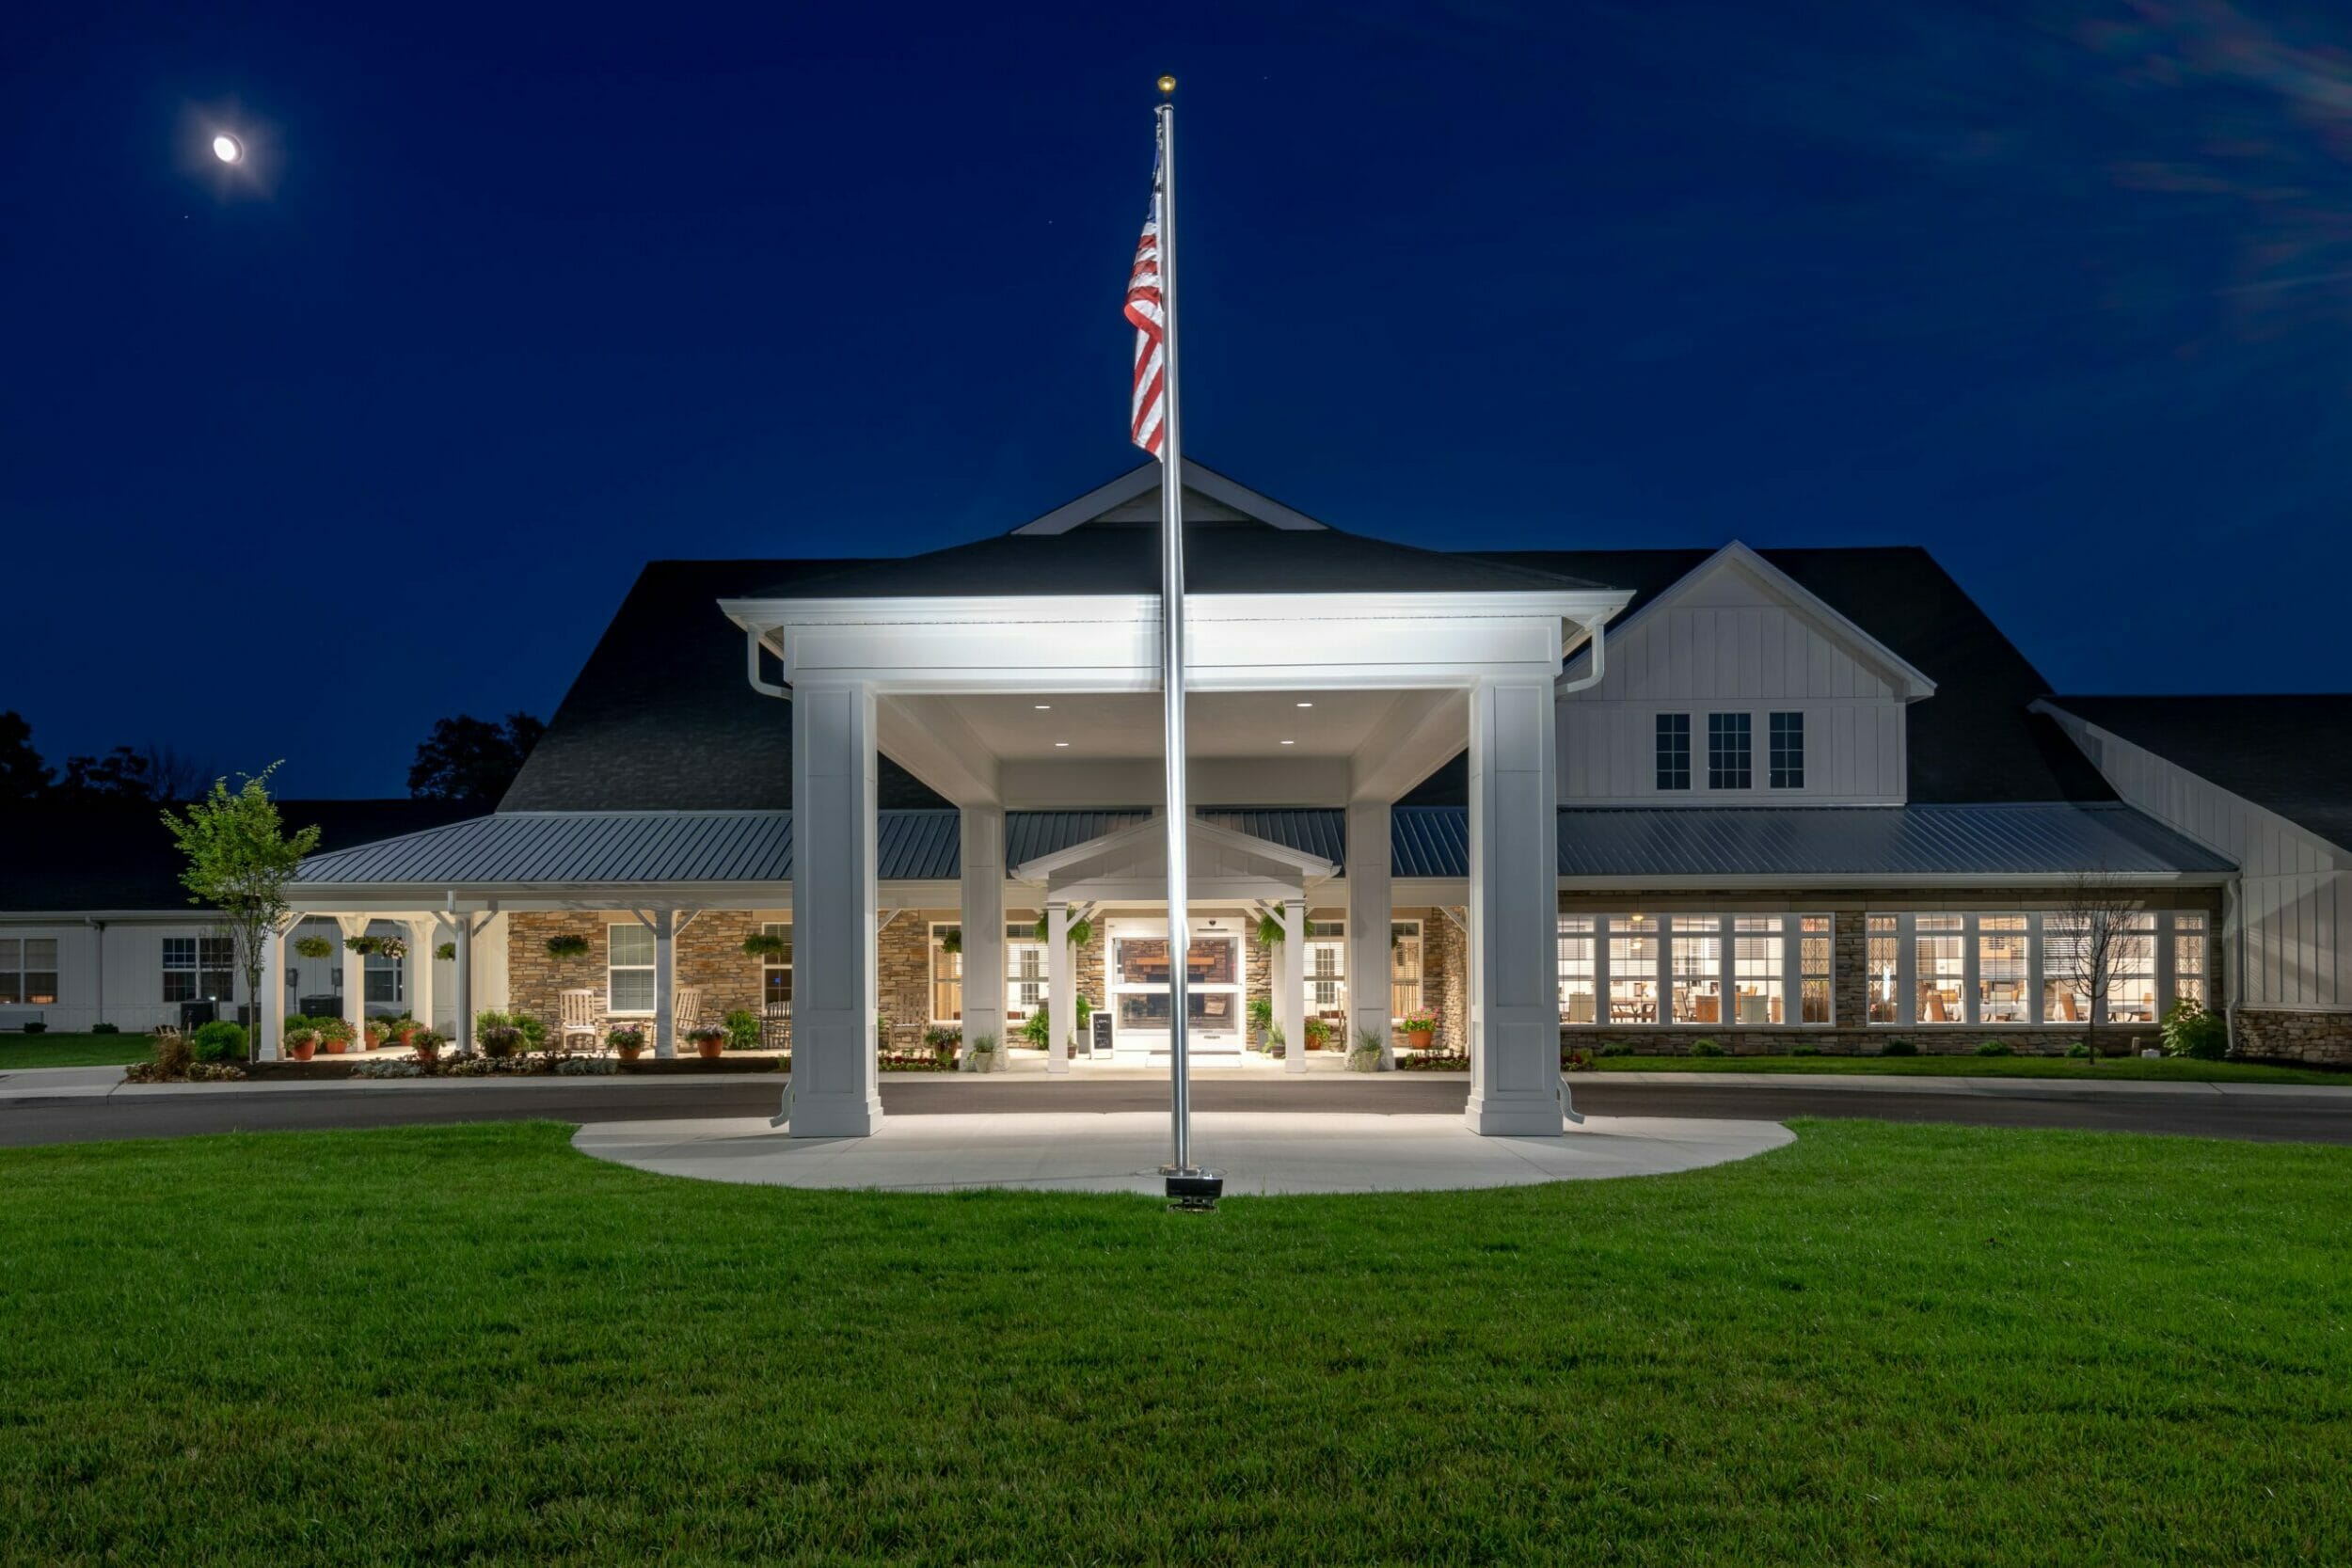 Exterior view of Demaree Crossing senior living at night with the american flag in front of the porte-cochère and front porch with stone accents